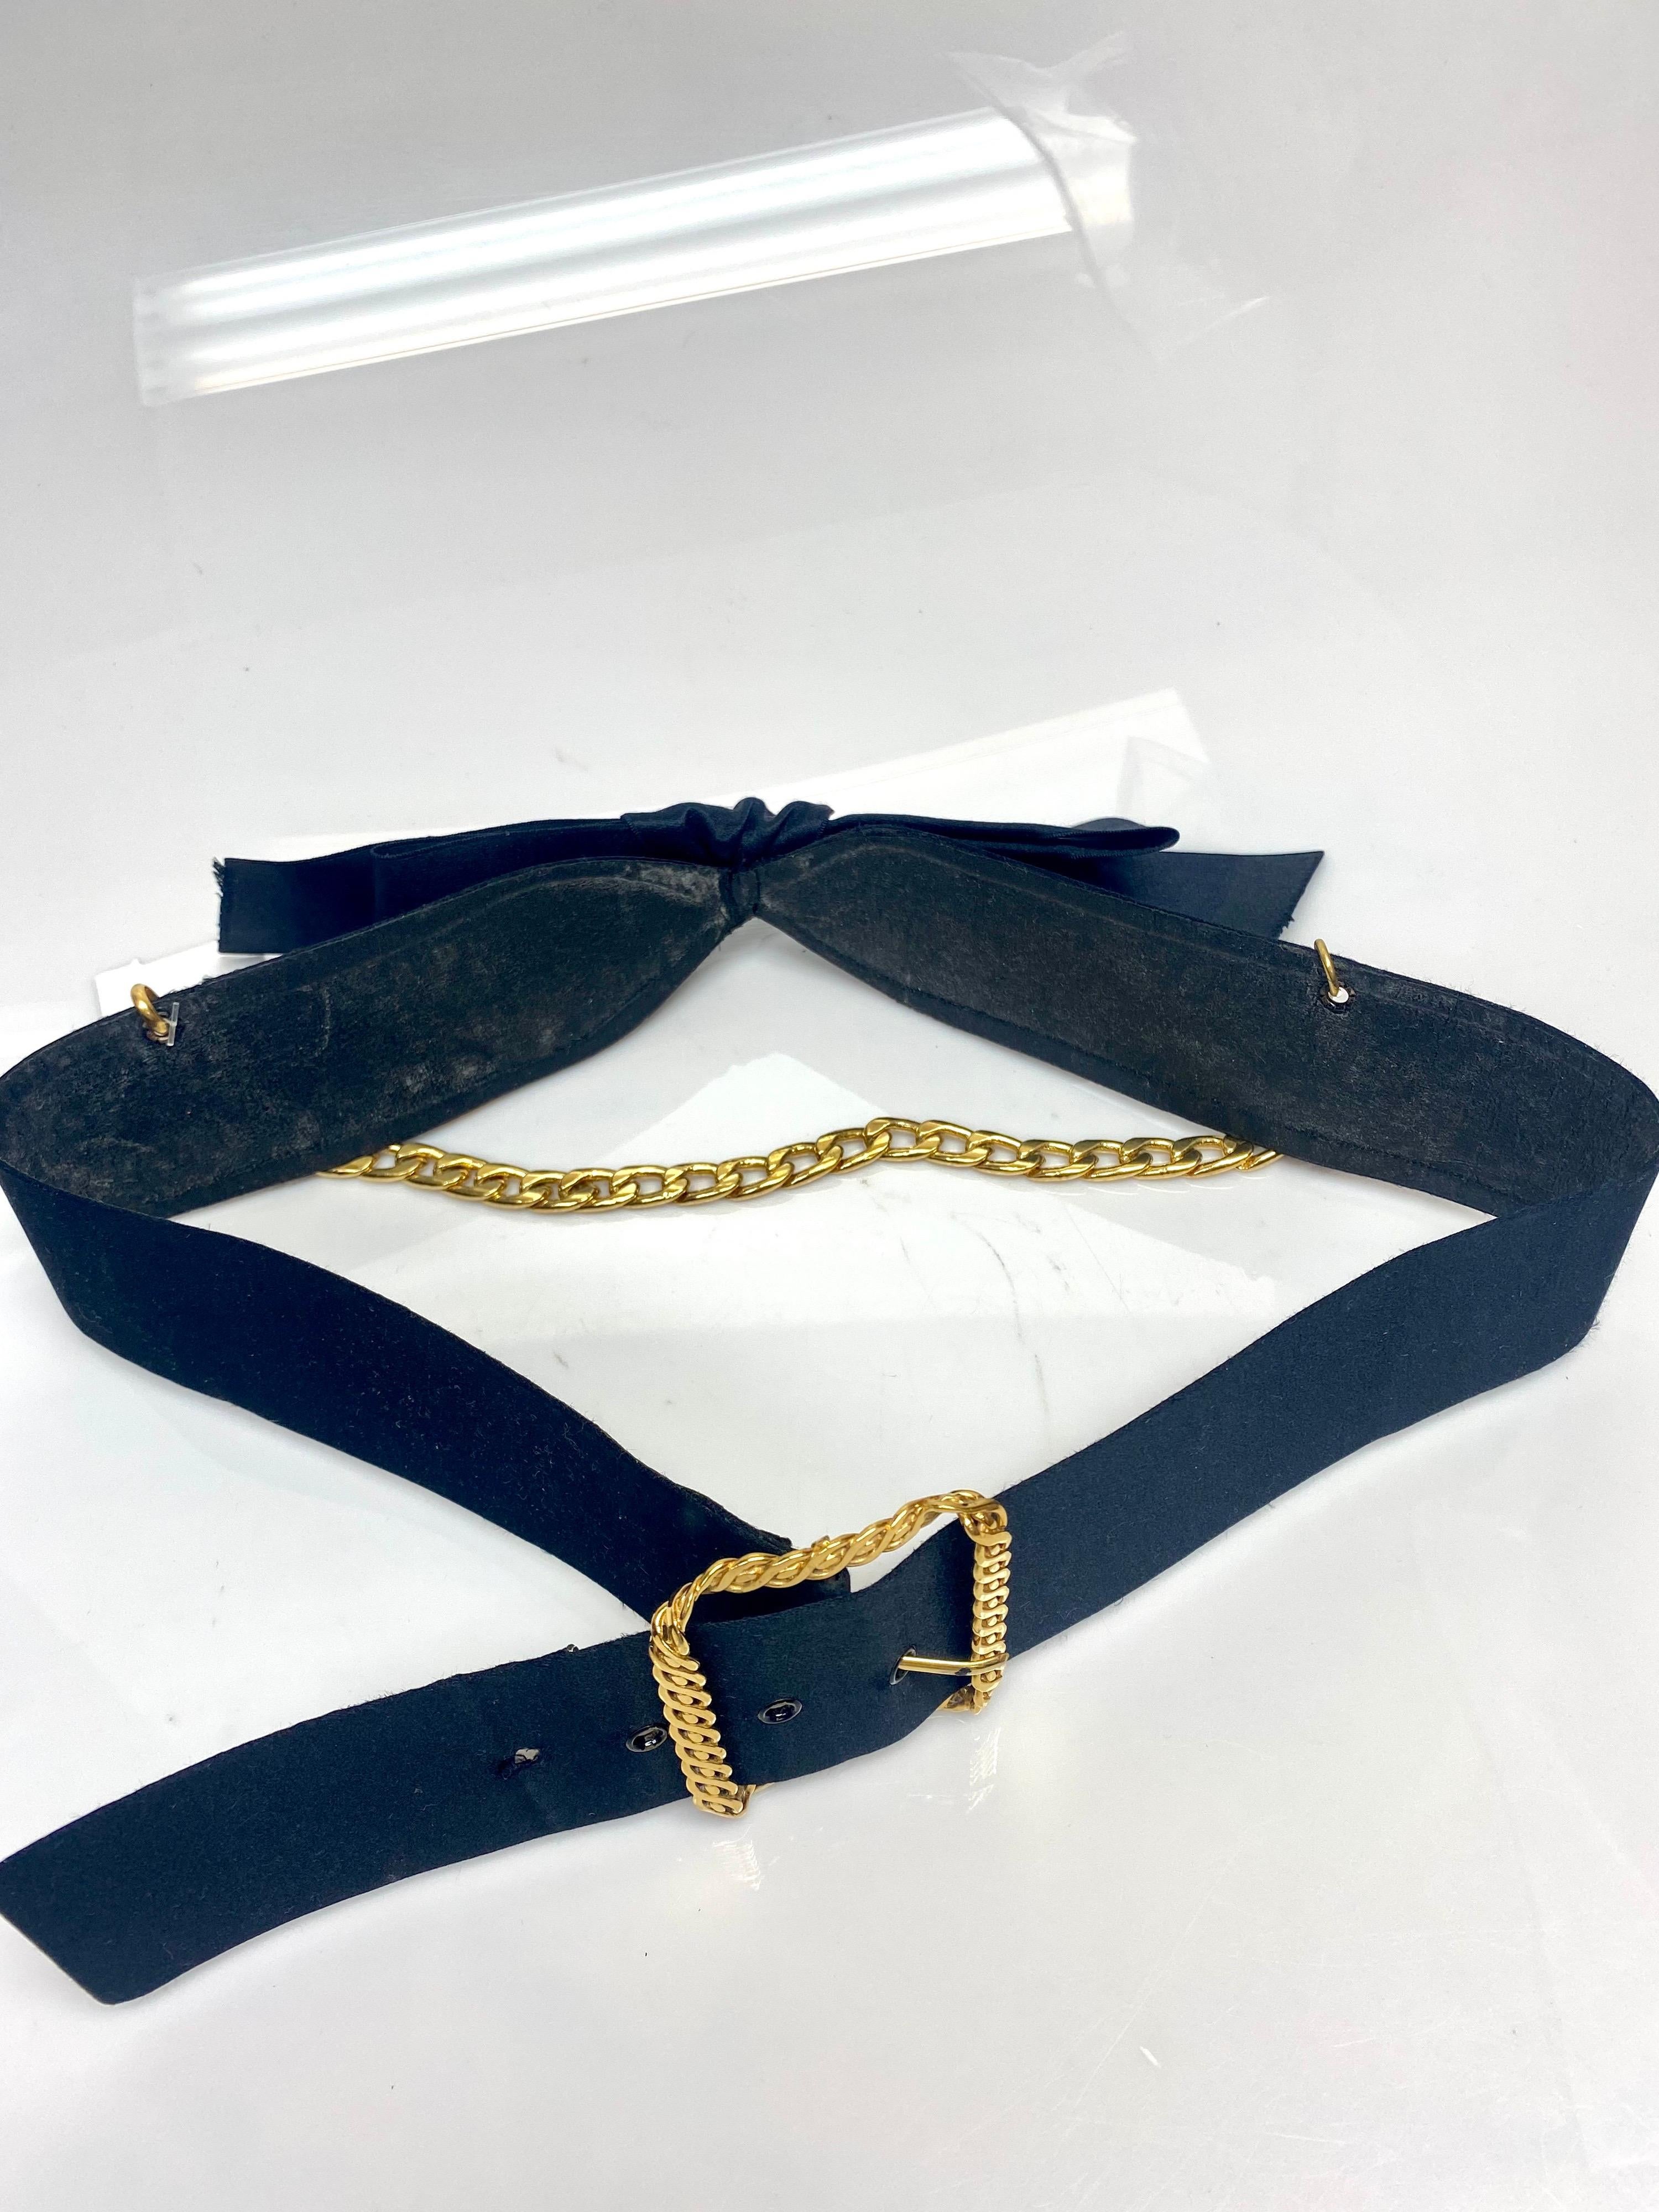 Chanel Vintage Black Satin Bow with Gold Buckle, Chain and Medalion Belt  For Sale 2